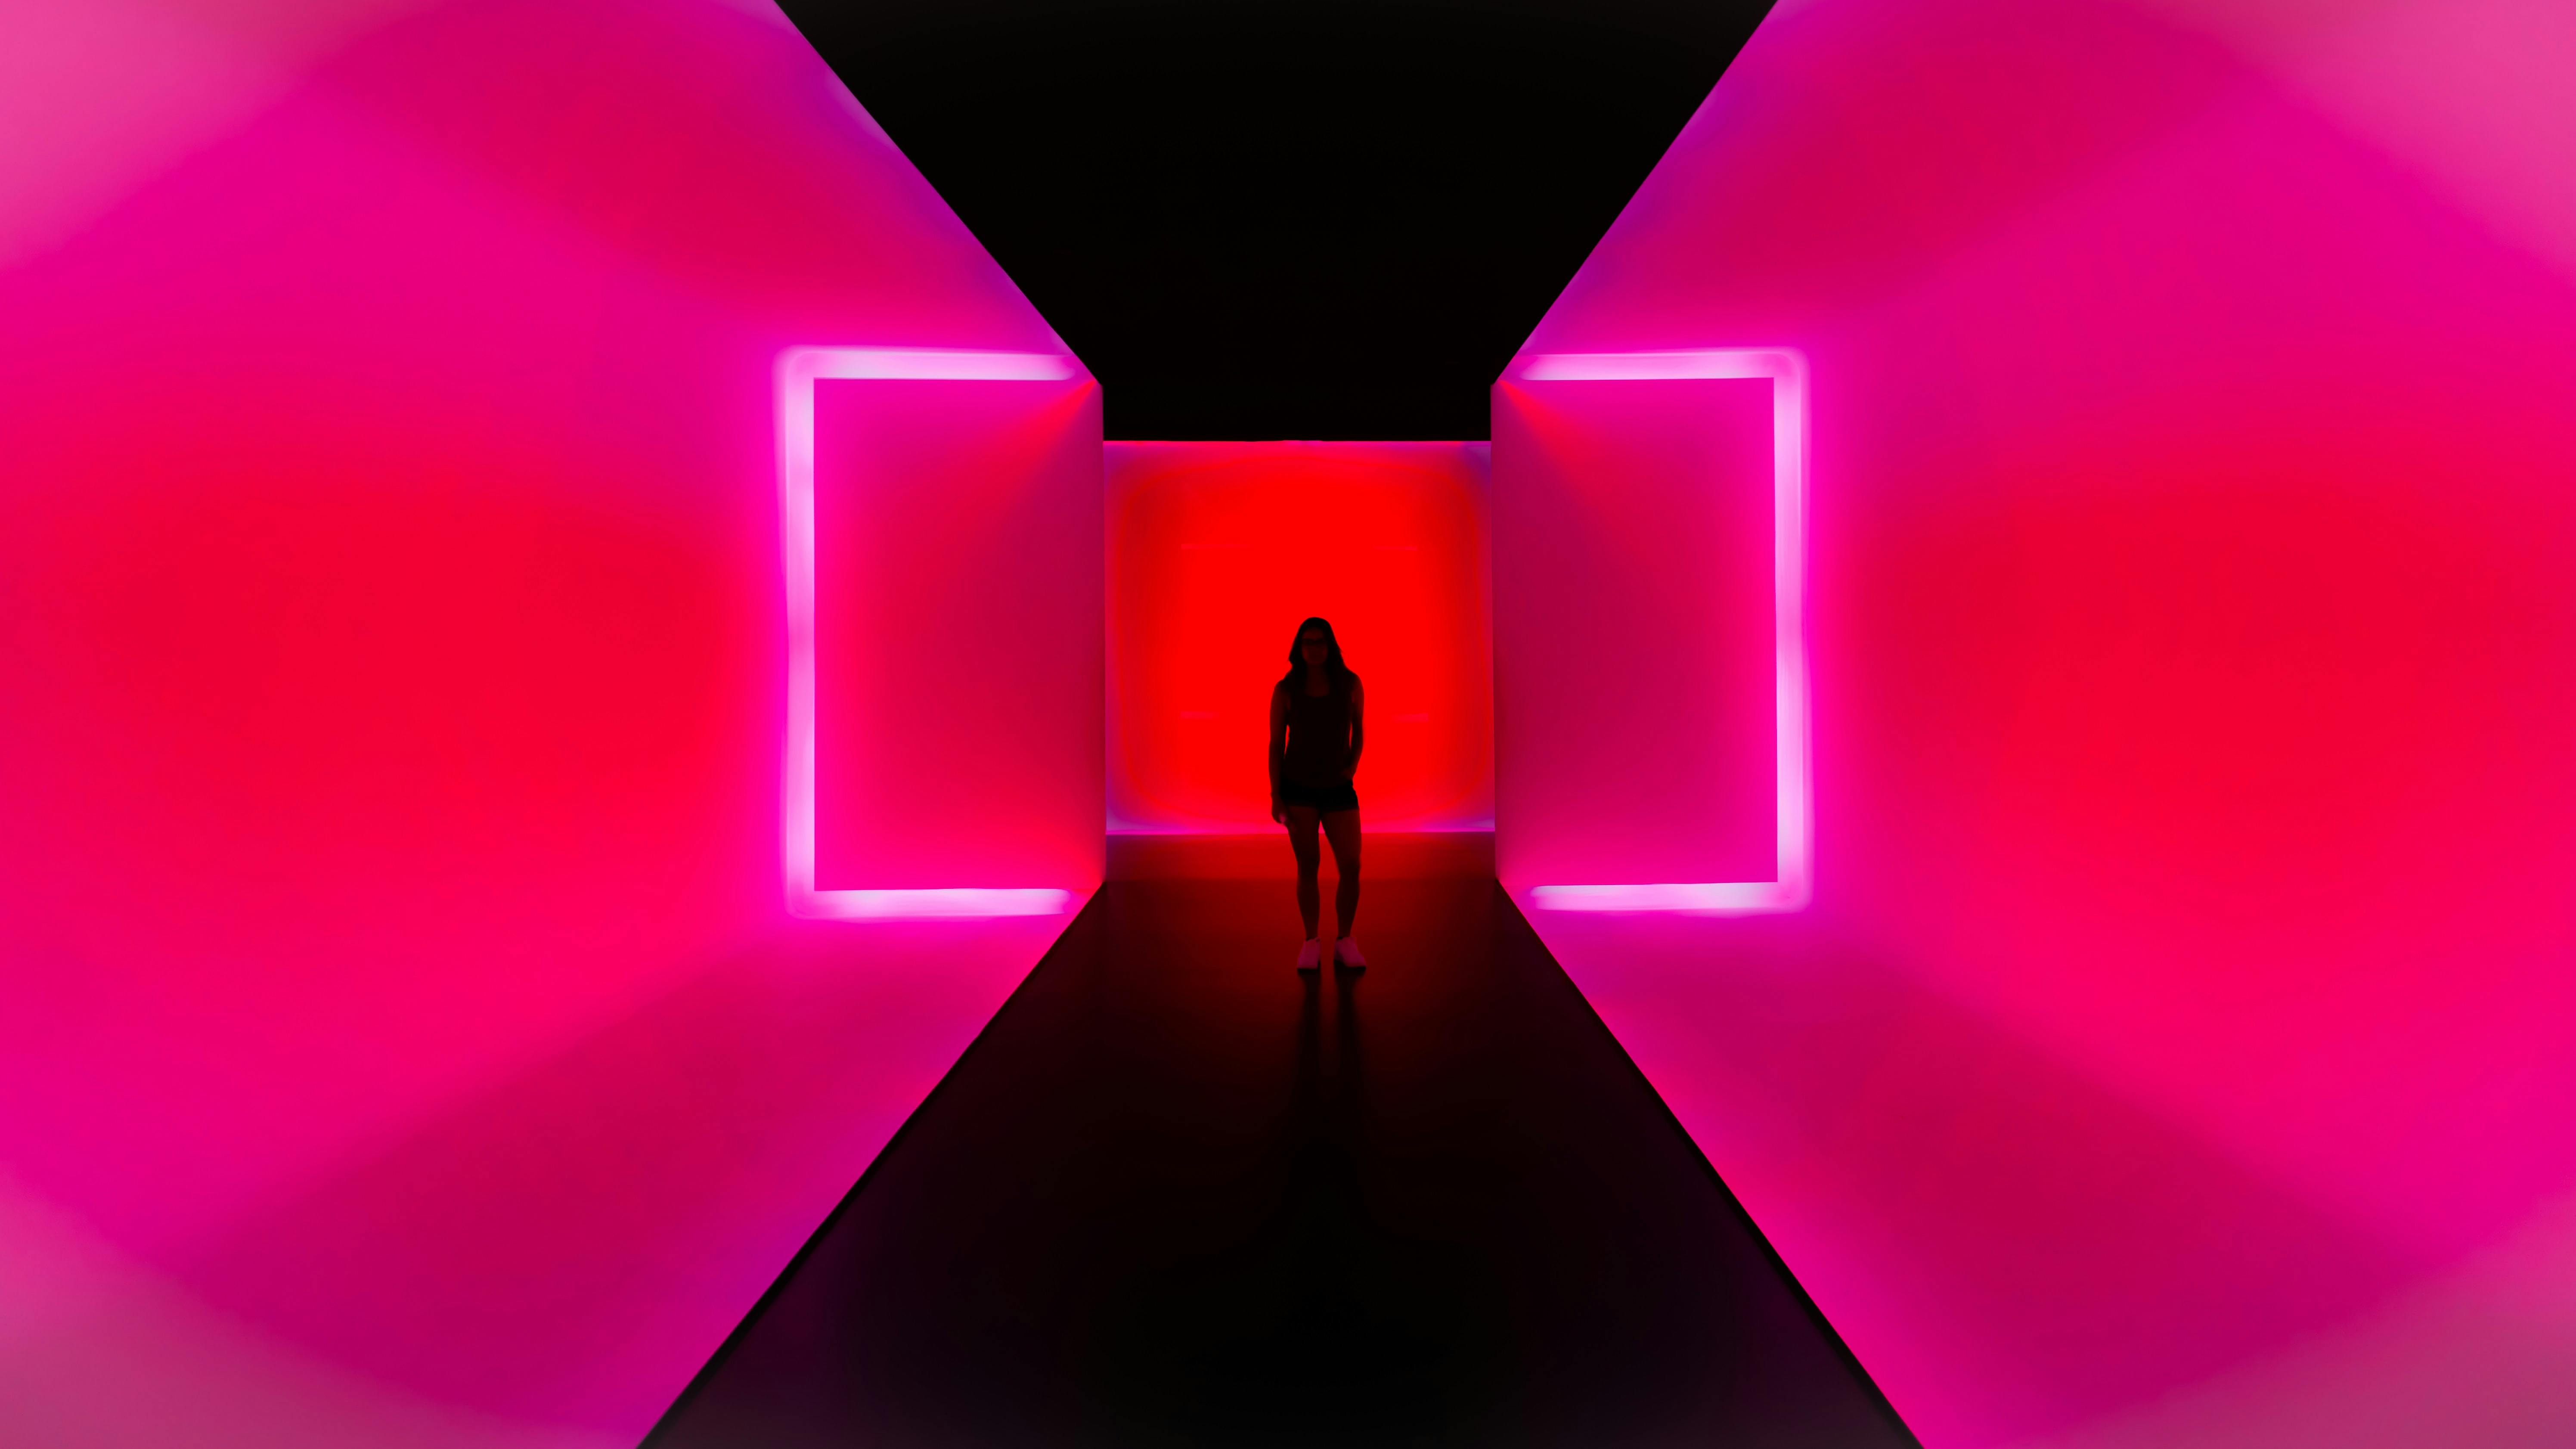 A person standing in a middle of a dark hallway with pink lit walls